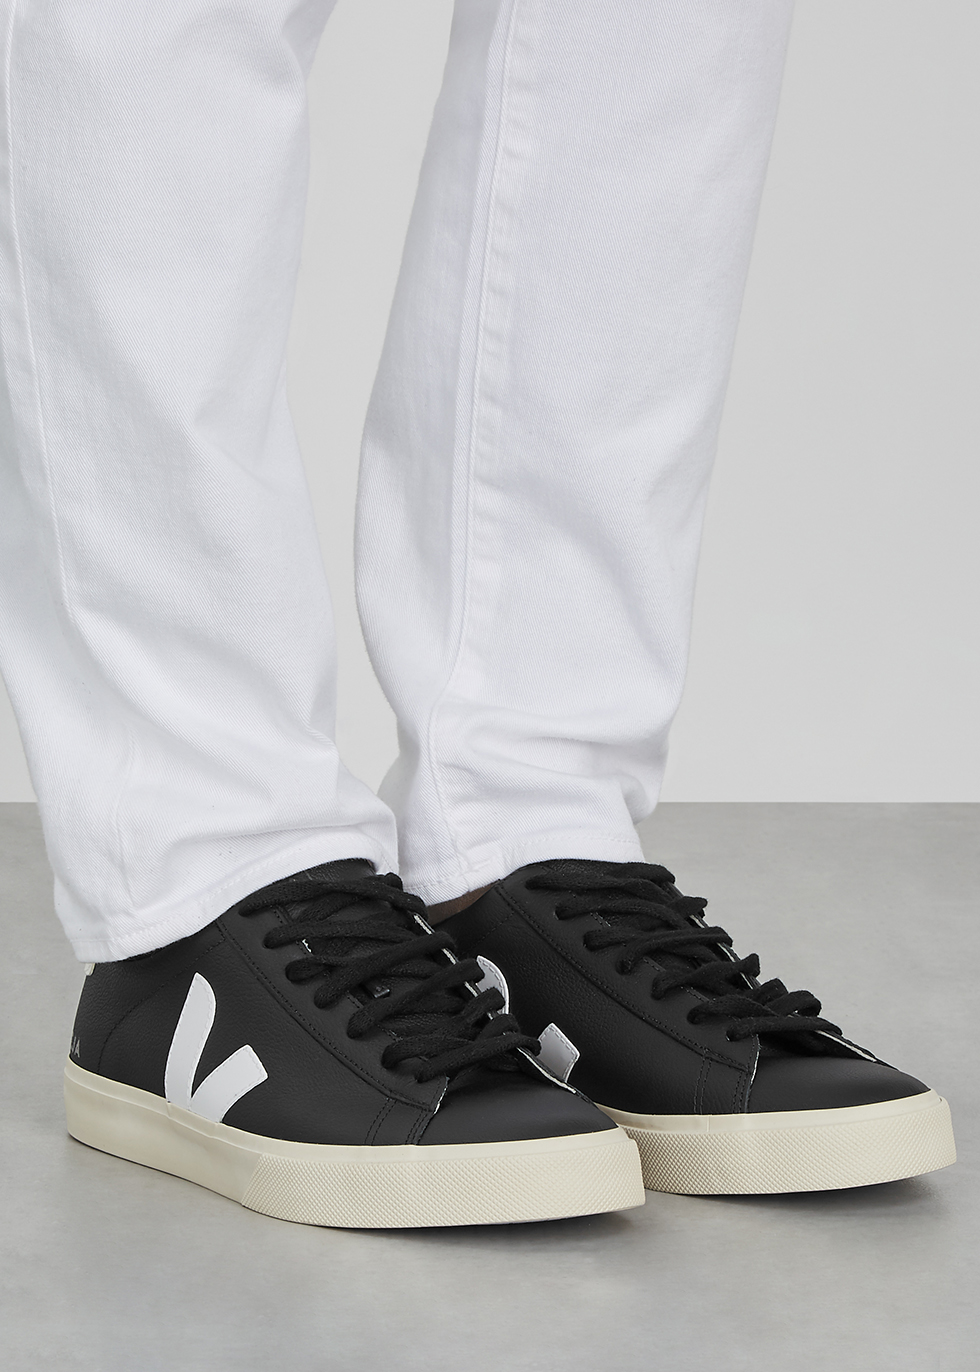 Veja Campo black leather sneakers 